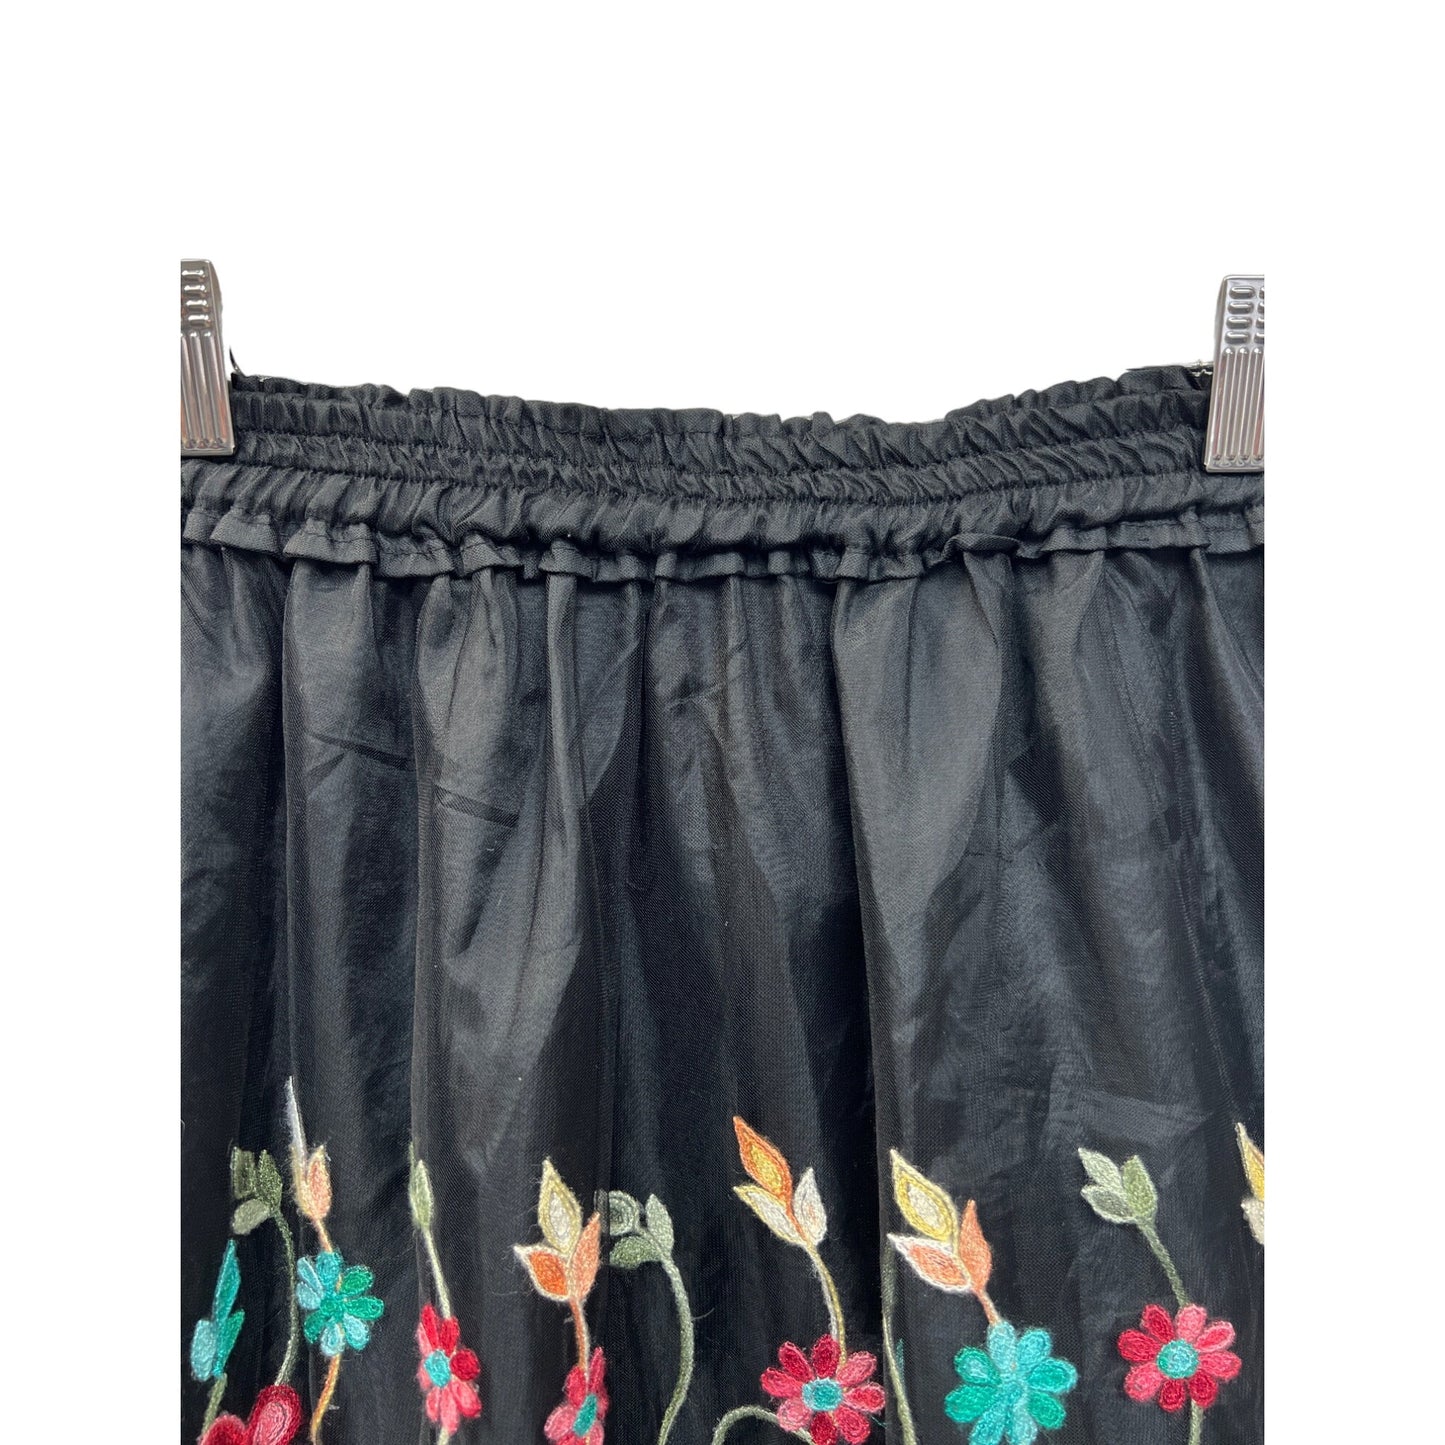 August Silk Black Sheer Overlay with Embroidered Floral Skirt